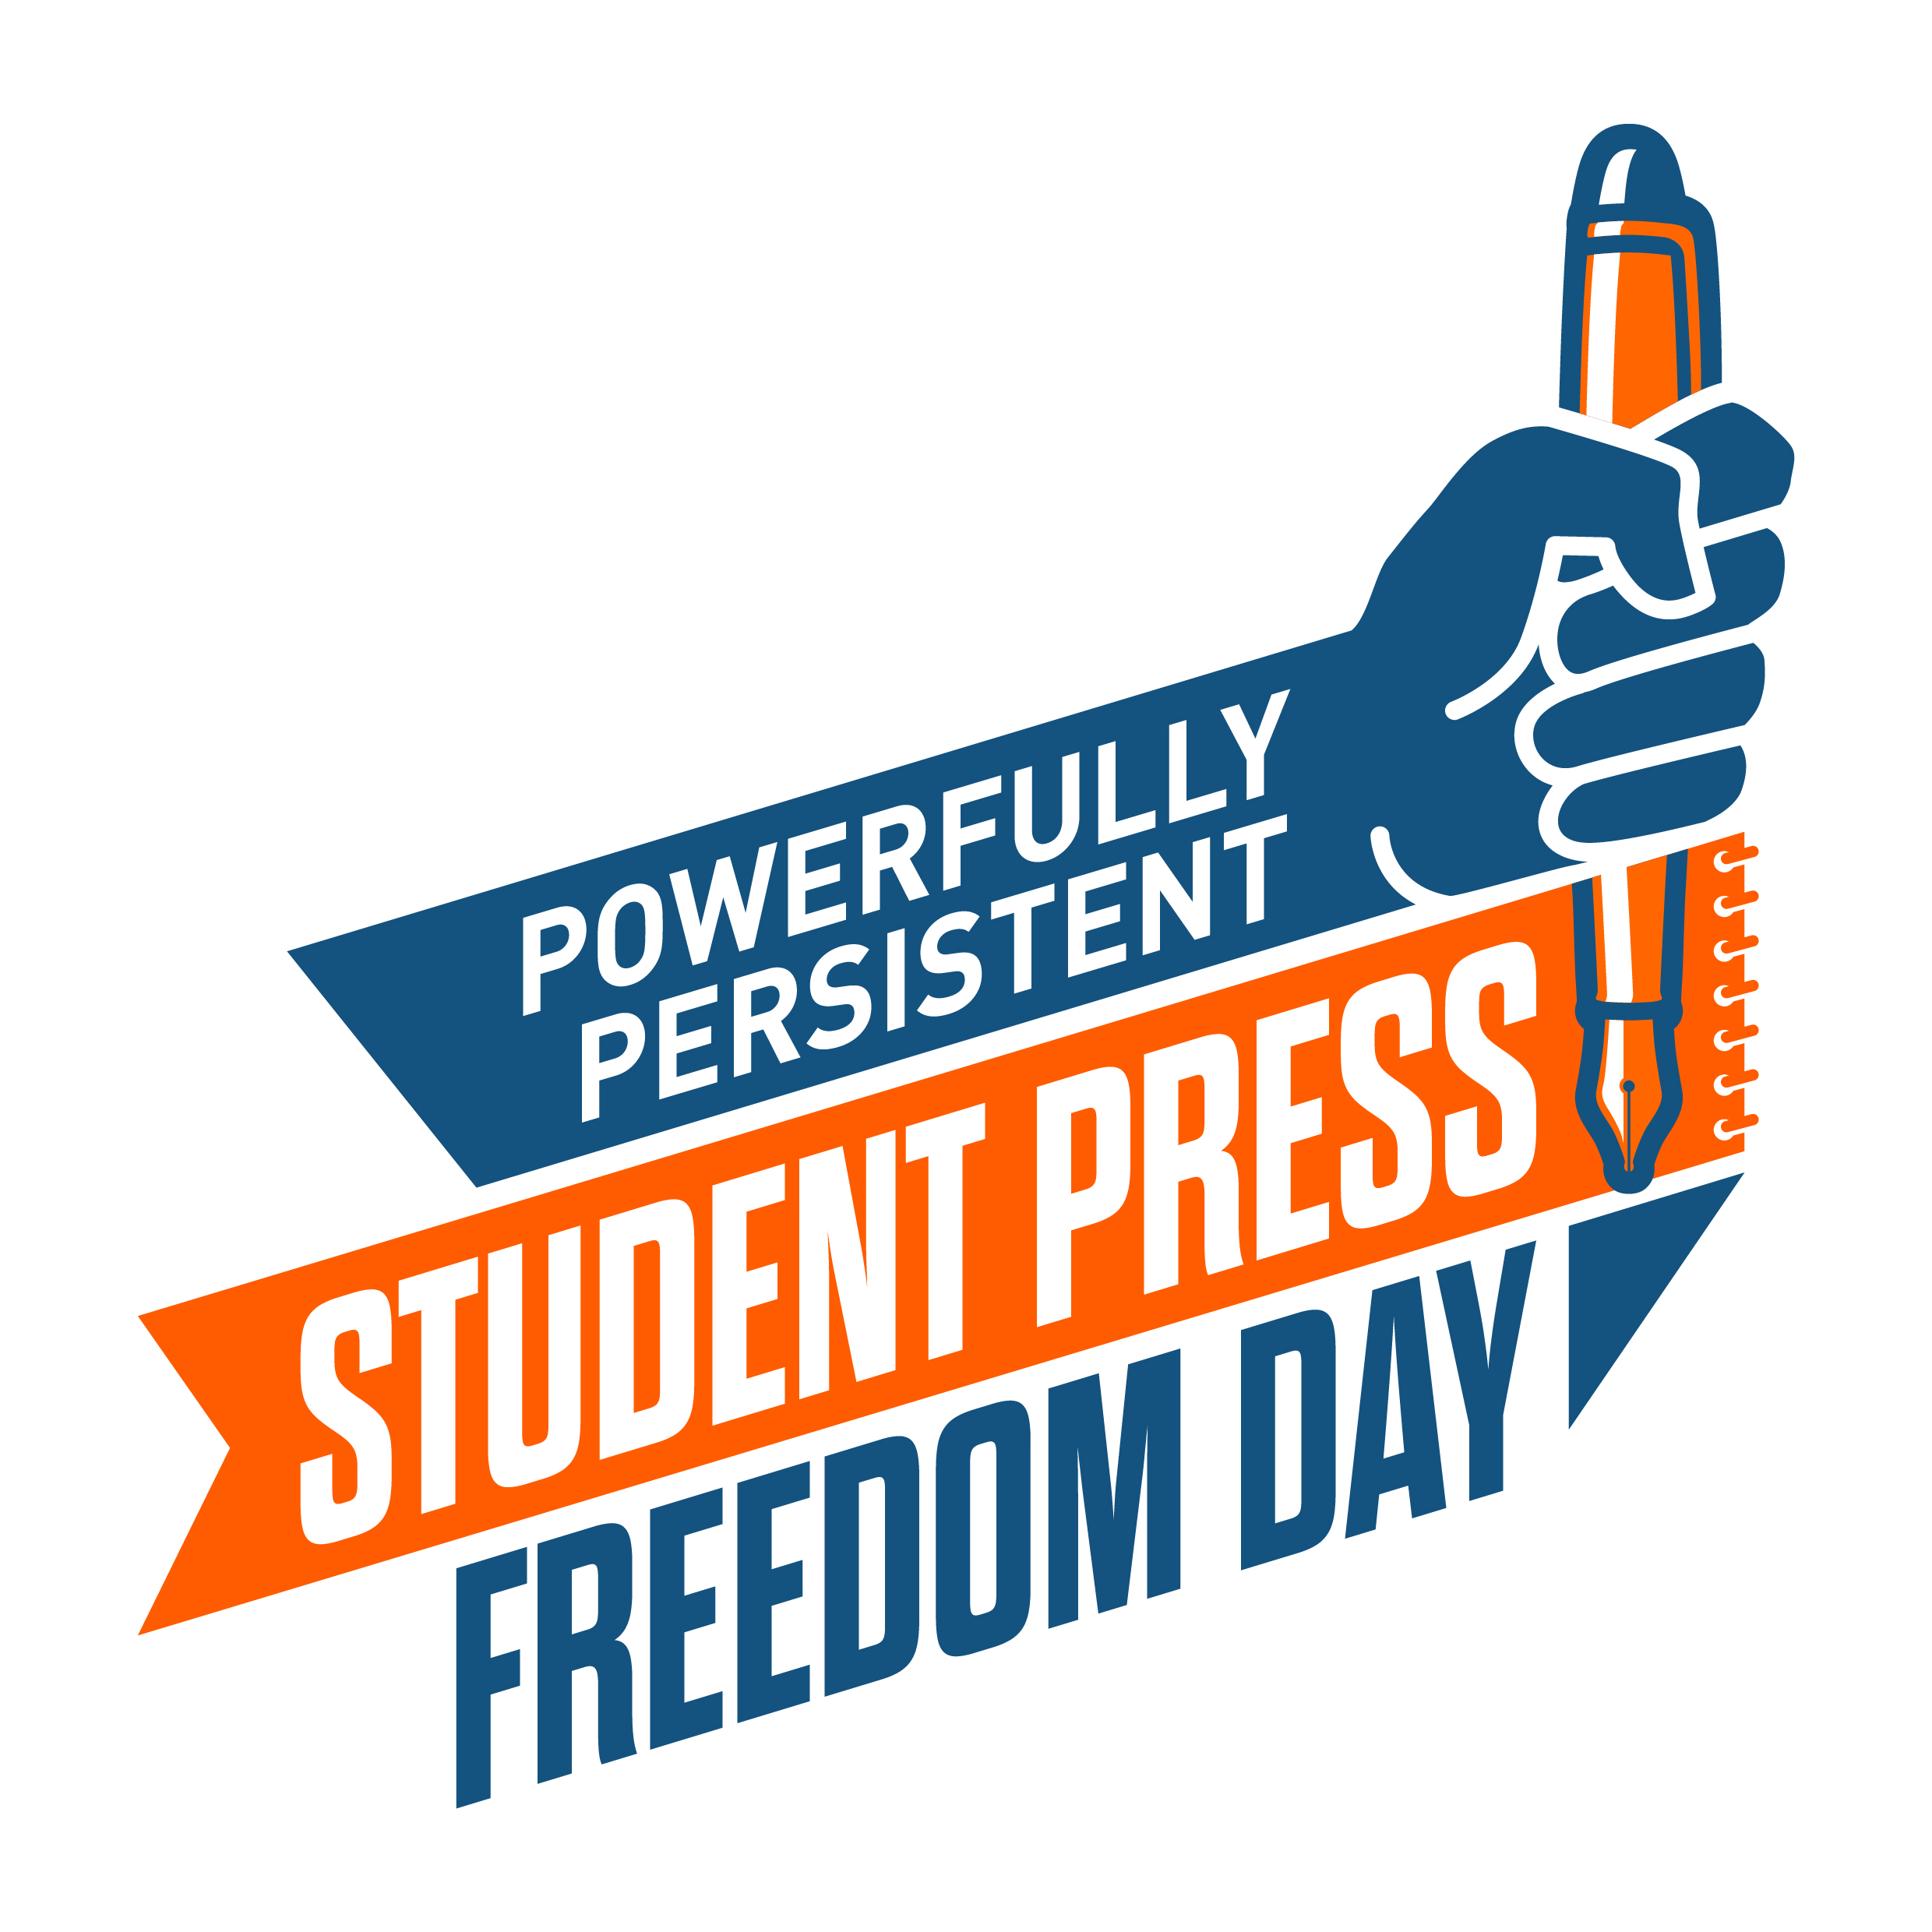 Student Press Freedom Day